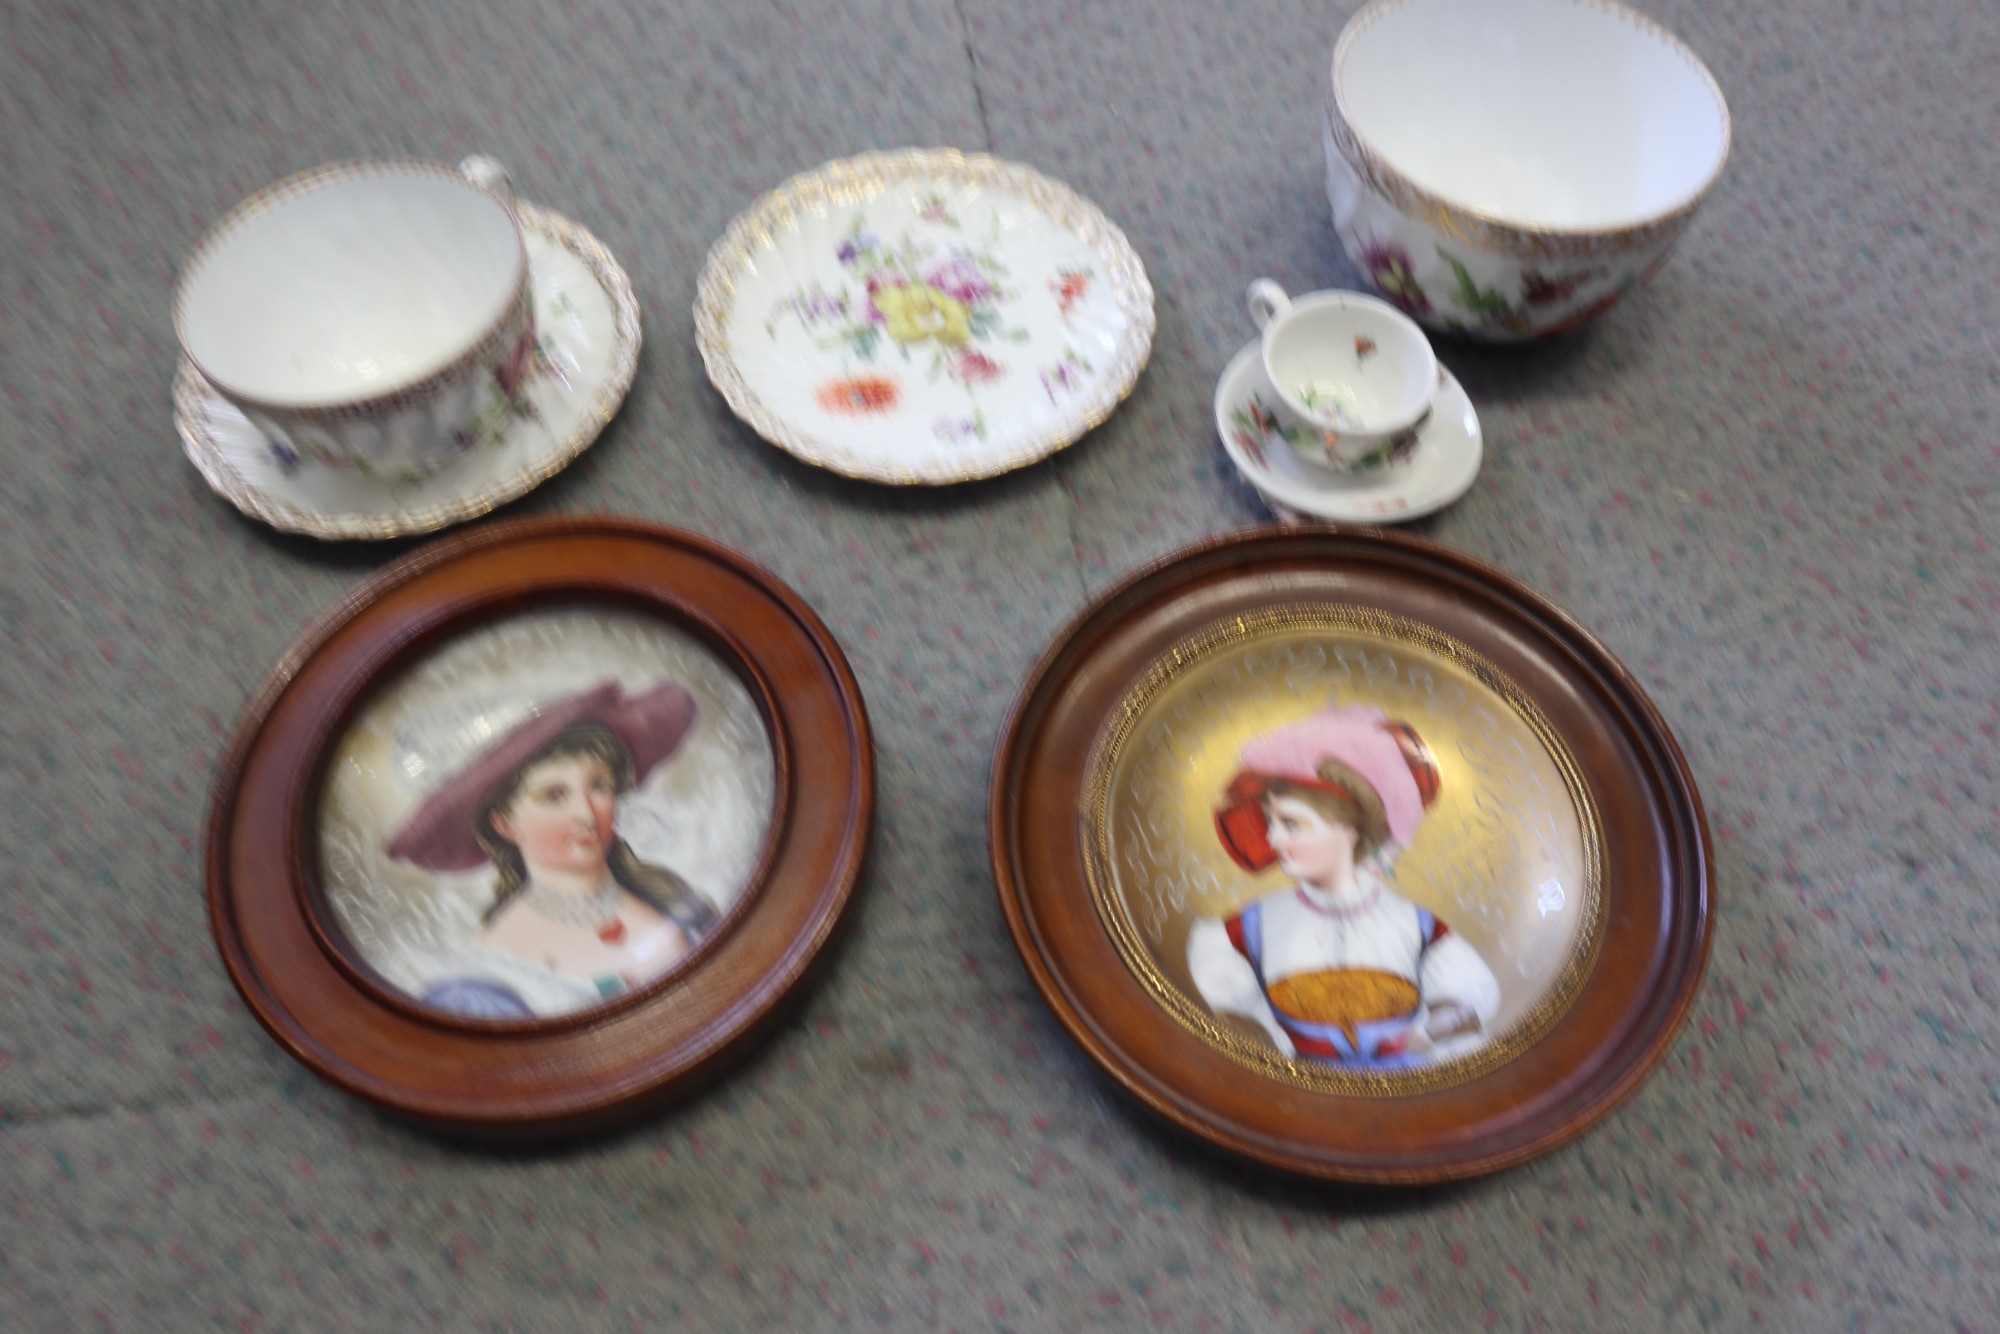 A pair of 19th century French porcelain wall plates, women in period costume, 4" dia, in mahogany